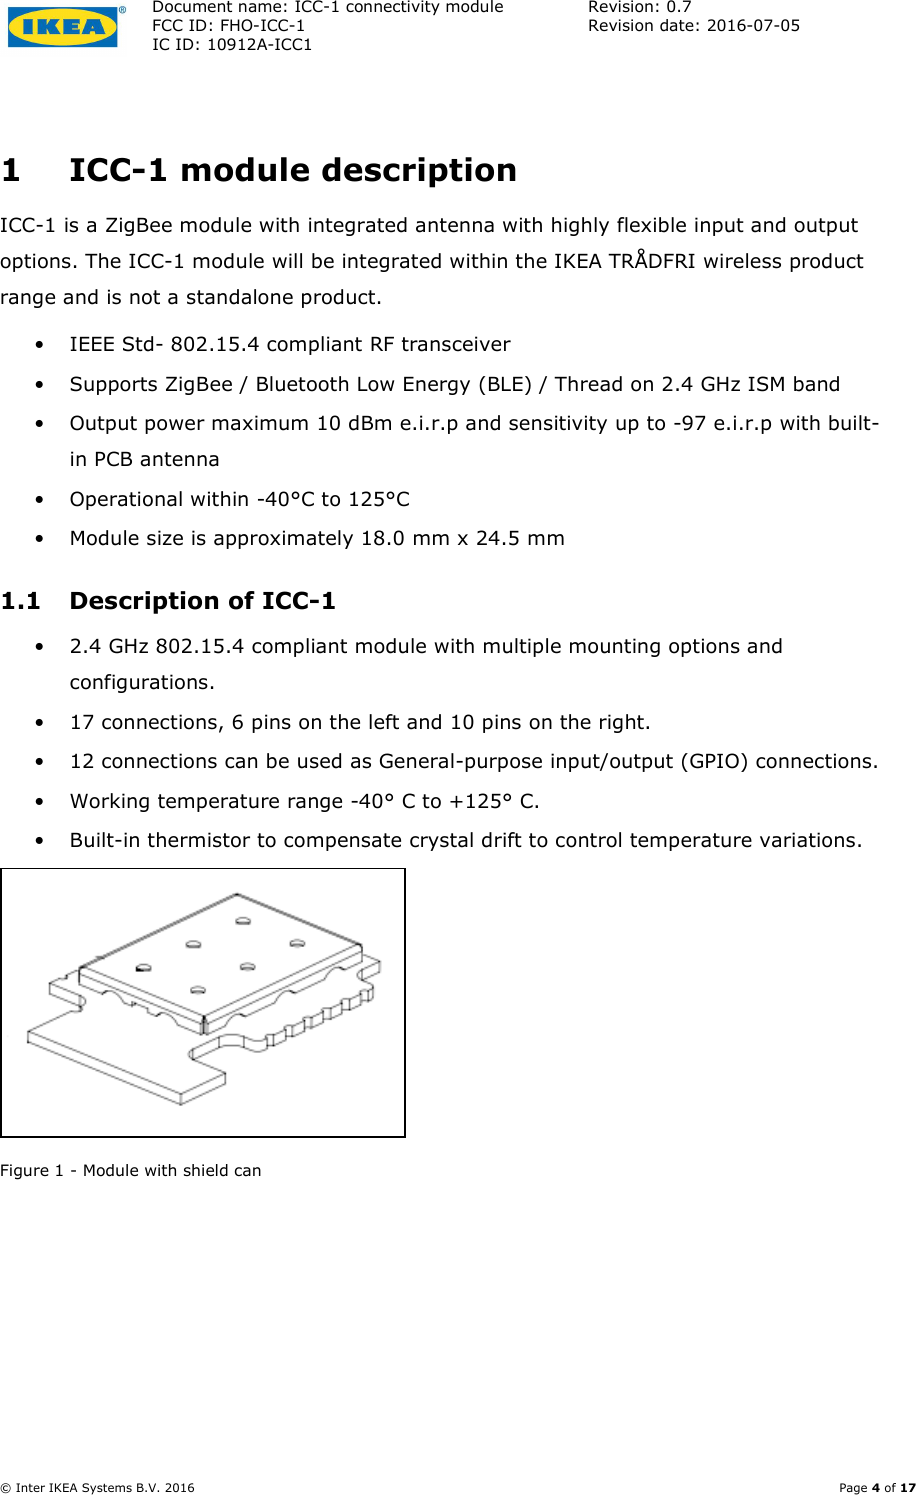 Document name: ICC-1 connectivity module  Revision: 0.7 FCC ID: FHO-ICC-1  Revision date: 2016-07-05  IC ID: 10912A-ICC1     © Inter IKEA Systems B.V. 2016    Page 4 of 17  1 ICC-1 module description ICC-1 is a ZigBee module with integrated antenna with highly flexible input and output options. The ICC-1 module will be integrated within the IKEA TRÅDFRI wireless product range and is not a standalone product. • IEEE Std- 802.15.4 compliant RF transceiver • Supports ZigBee / Bluetooth Low Energy (BLE) / Thread on 2.4 GHz ISM band • Output power maximum 10 dBm e.i.r.p and sensitivity up to -97 e.i.r.p with built-in PCB antenna • Operational within -40°C to 125°C • Module size is approximately 18.0 mm x 24.5 mm 1.1 Description of ICC-1 • 2.4 GHz 802.15.4 compliant module with multiple mounting options and configurations. • 17 connections, 6 pins on the left and 10 pins on the right. • 12 connections can be used as General-purpose input/output (GPIO) connections. • Working temperature range -40° C to +125° C. • Built-in thermistor to compensate crystal drift to control temperature variations.  Figure 1 - Module with shield can 